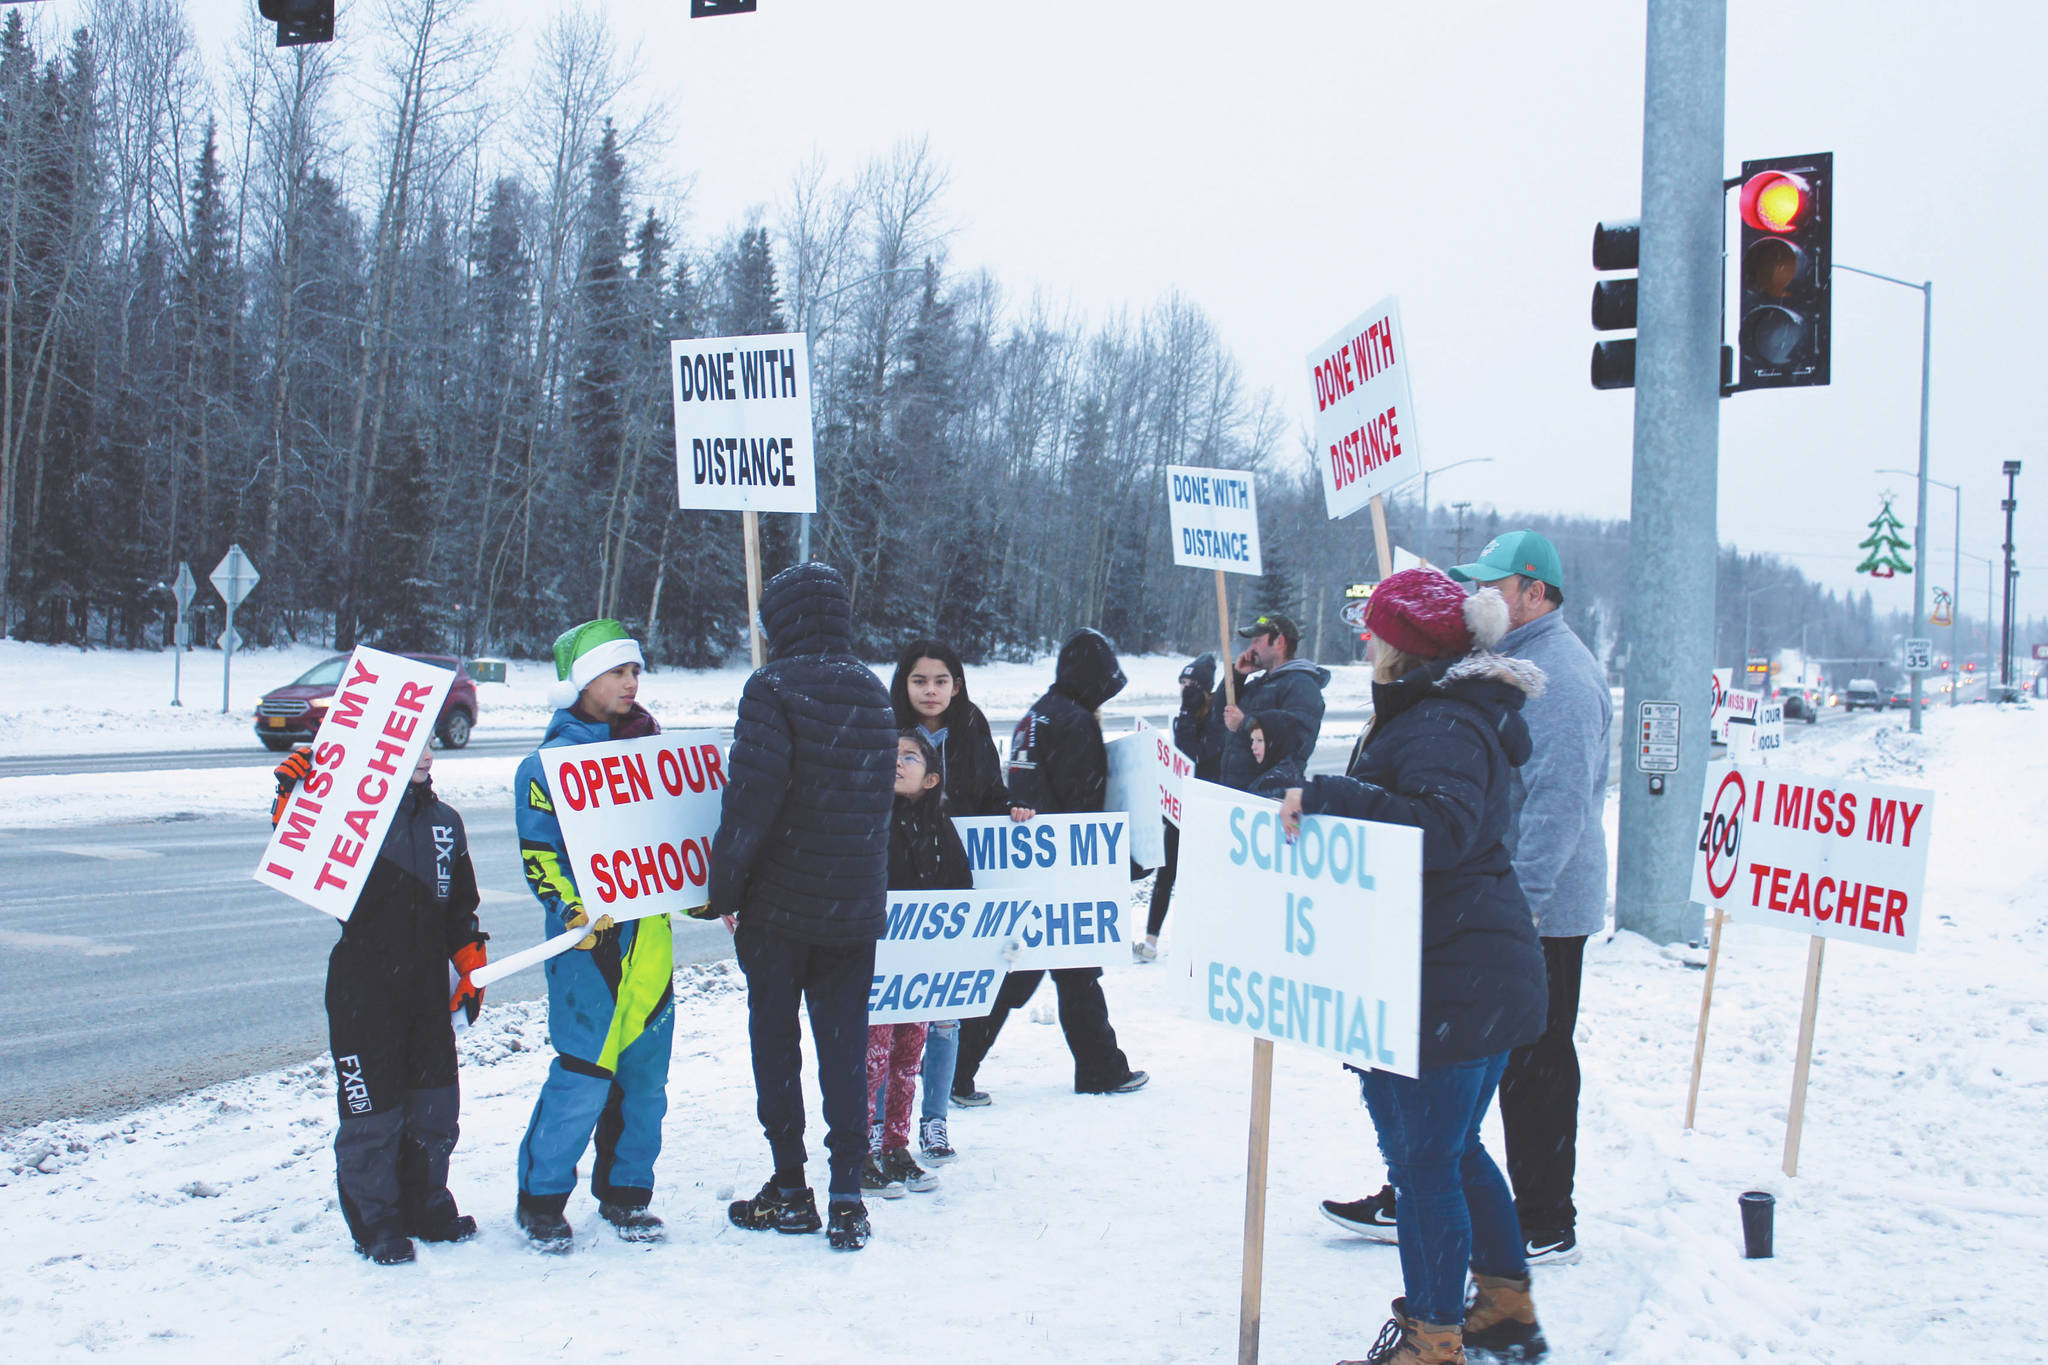 Protestors are seen at the intersection of Kenai Spur Hwy. and Sterling Hwy. on Tuesday, Dec. 15, 2020 in Soldotna, Alaska. (Photo by Ashlyn O’Hara/Peninsula Clarion)